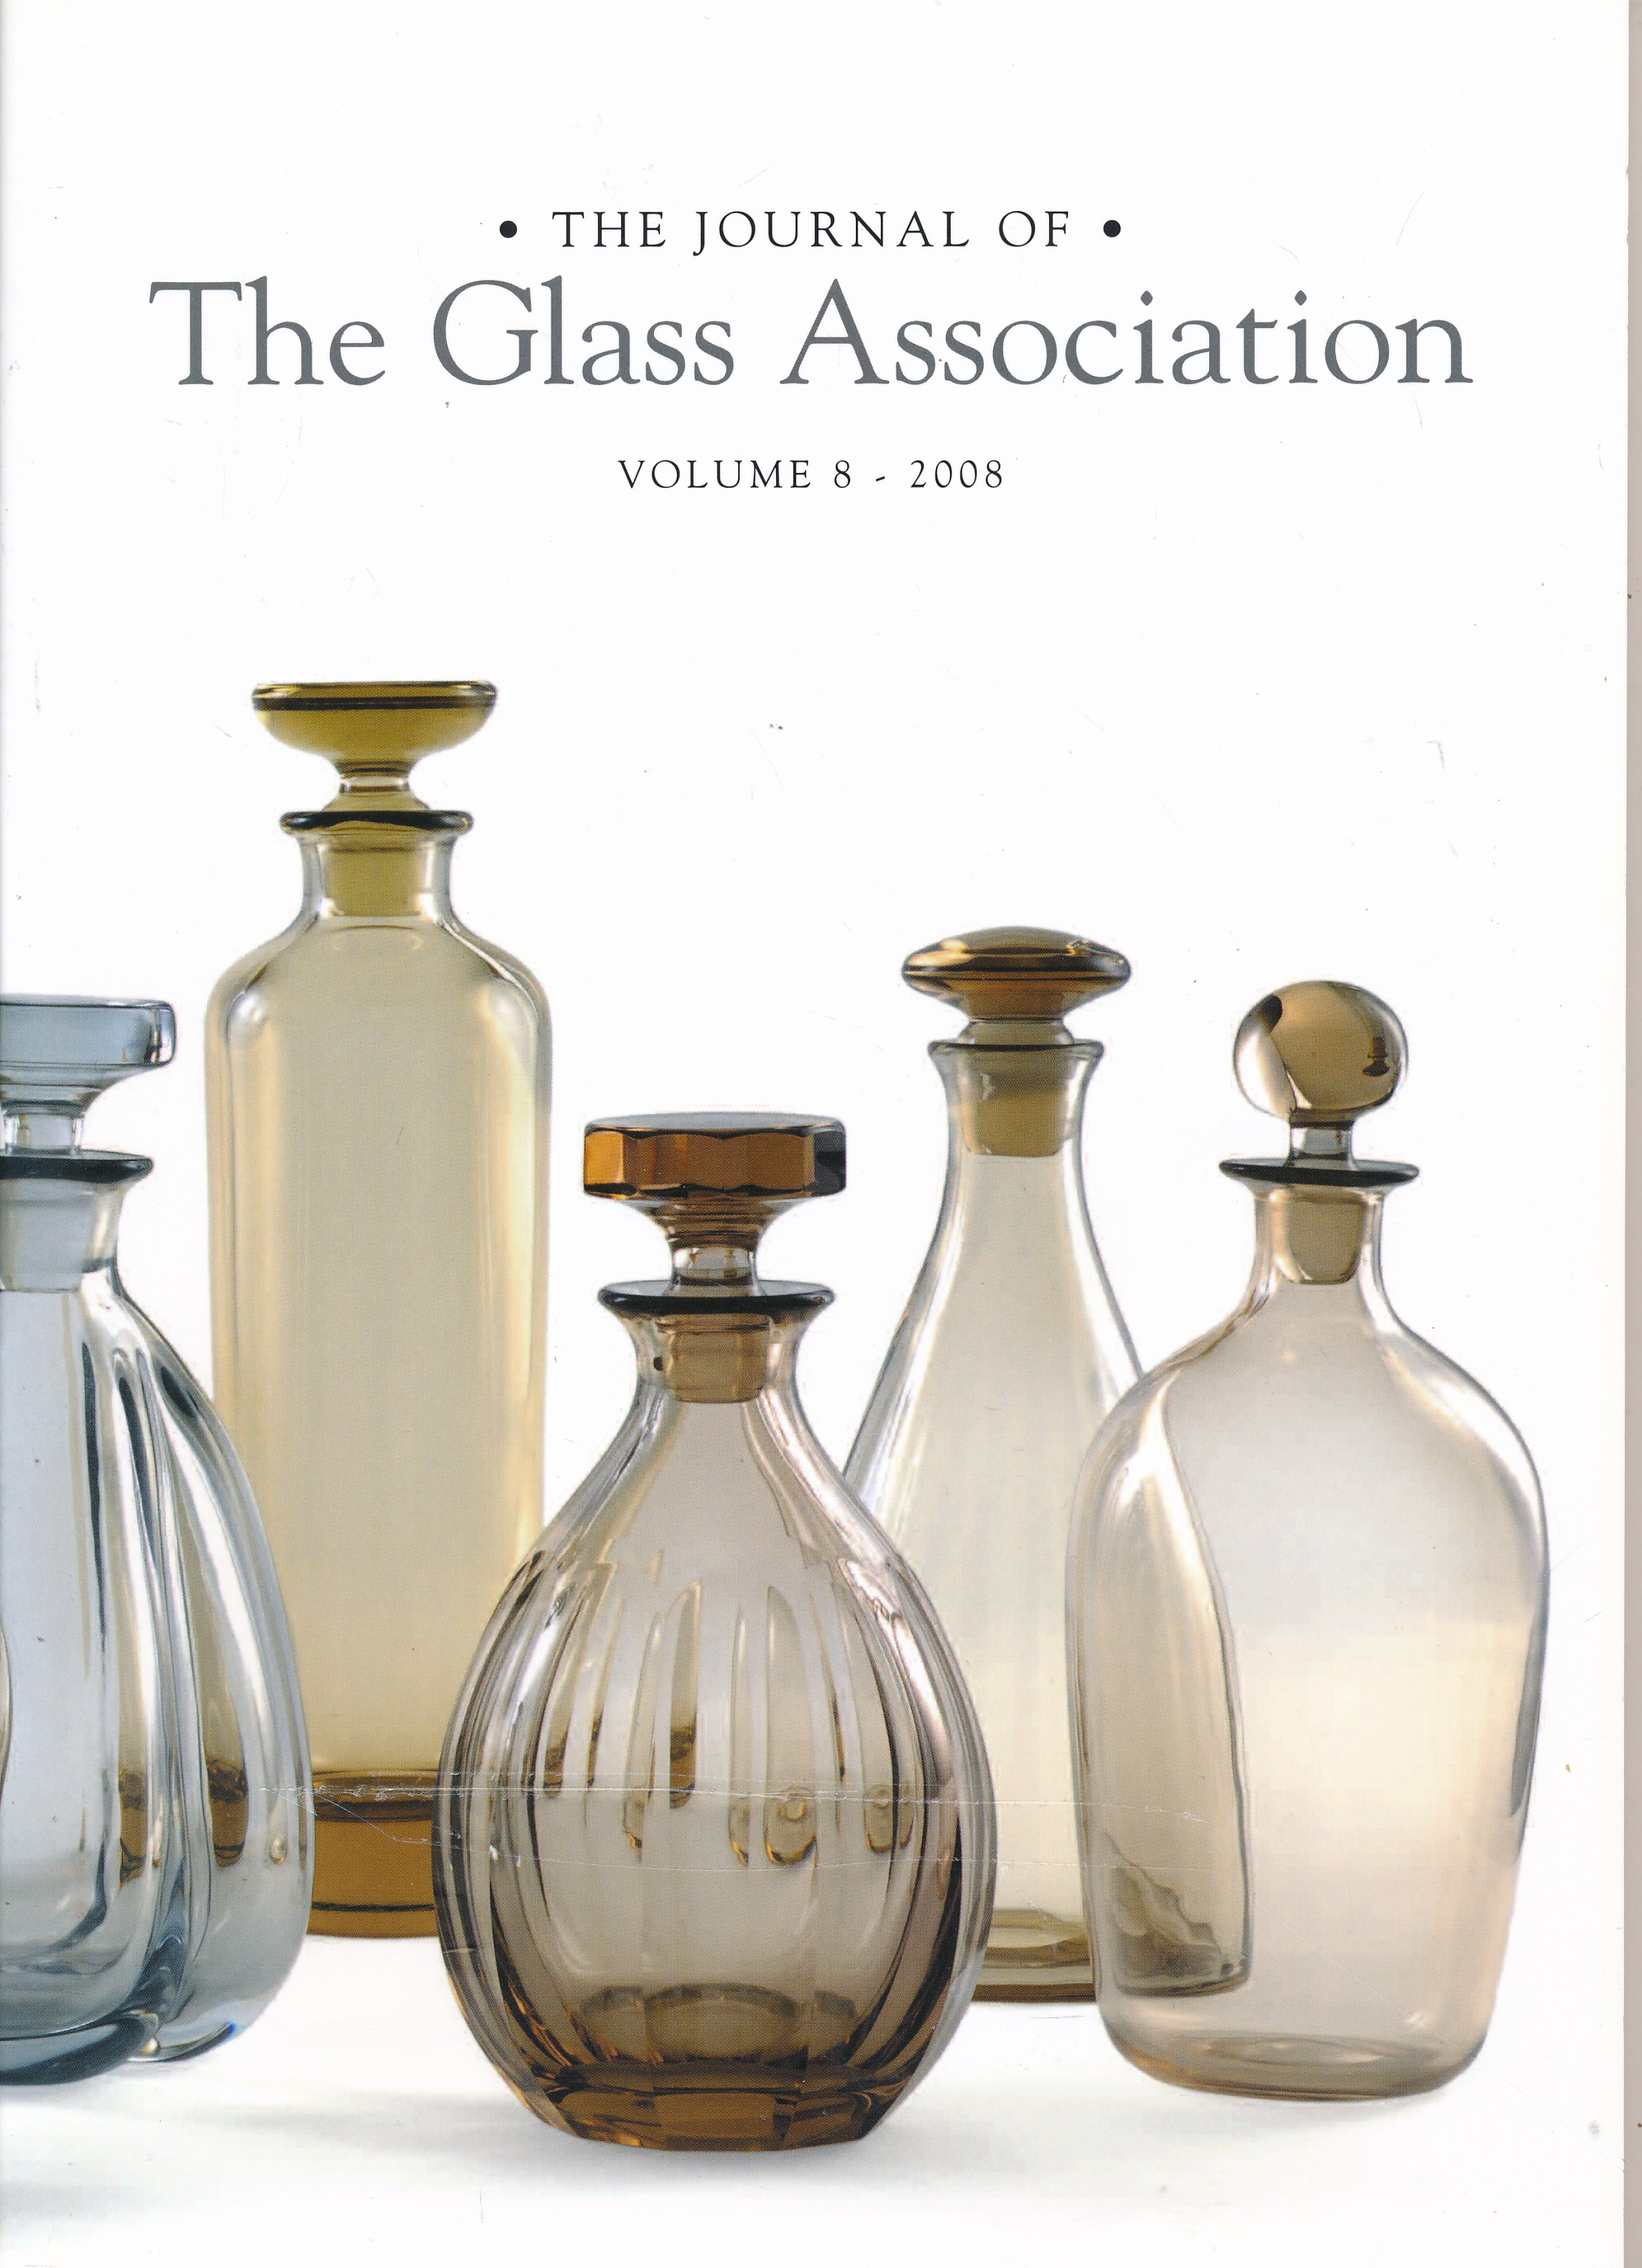 The Journal of the Glass Association. Volume 8. 2008